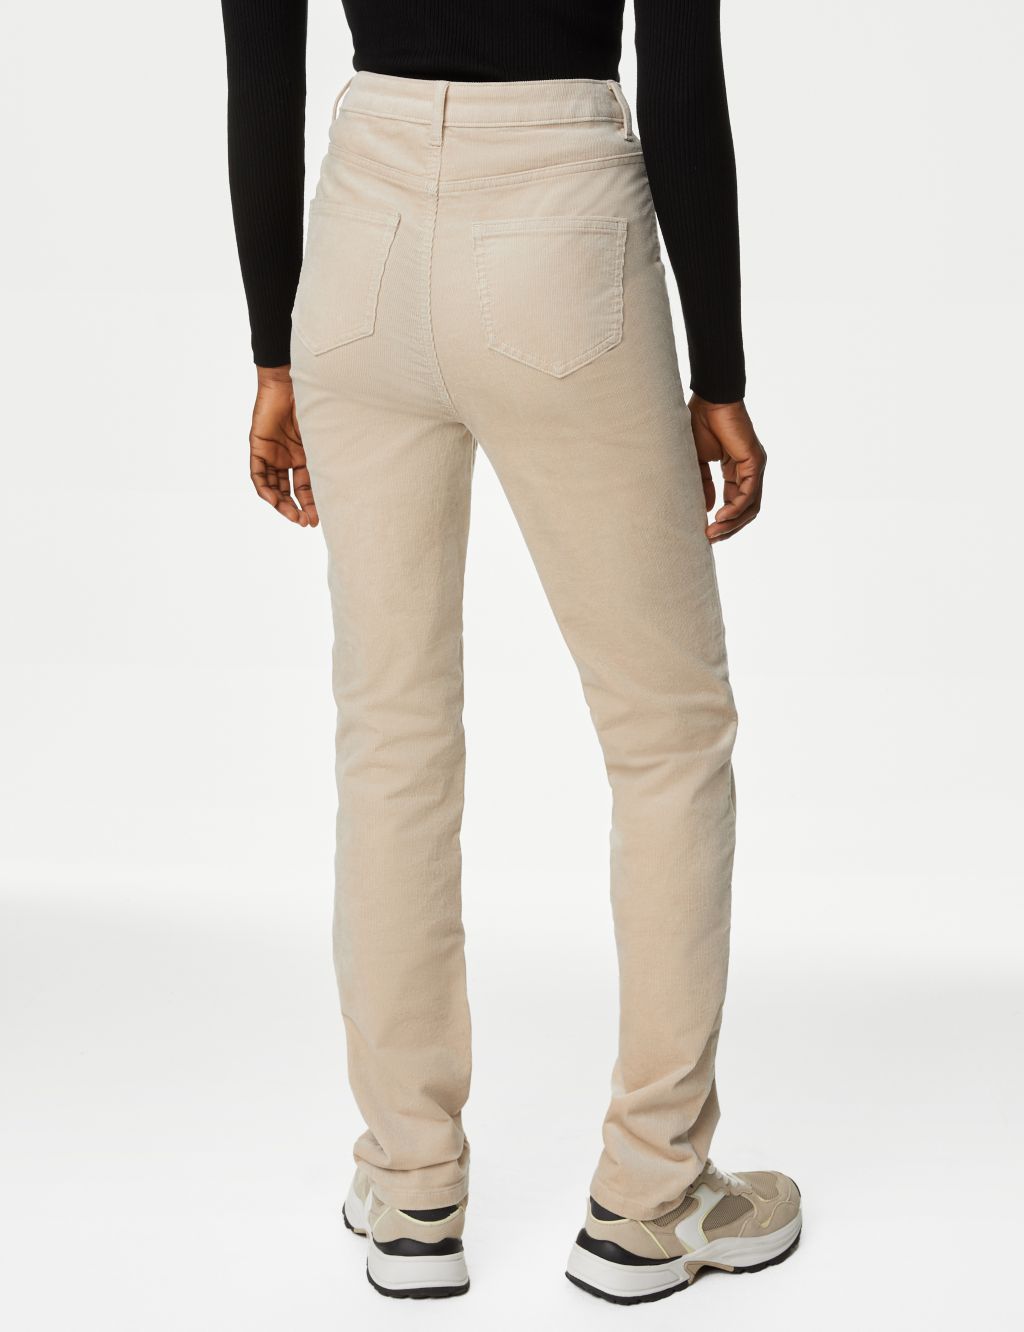 Cord Straight Leg Trousers image 5